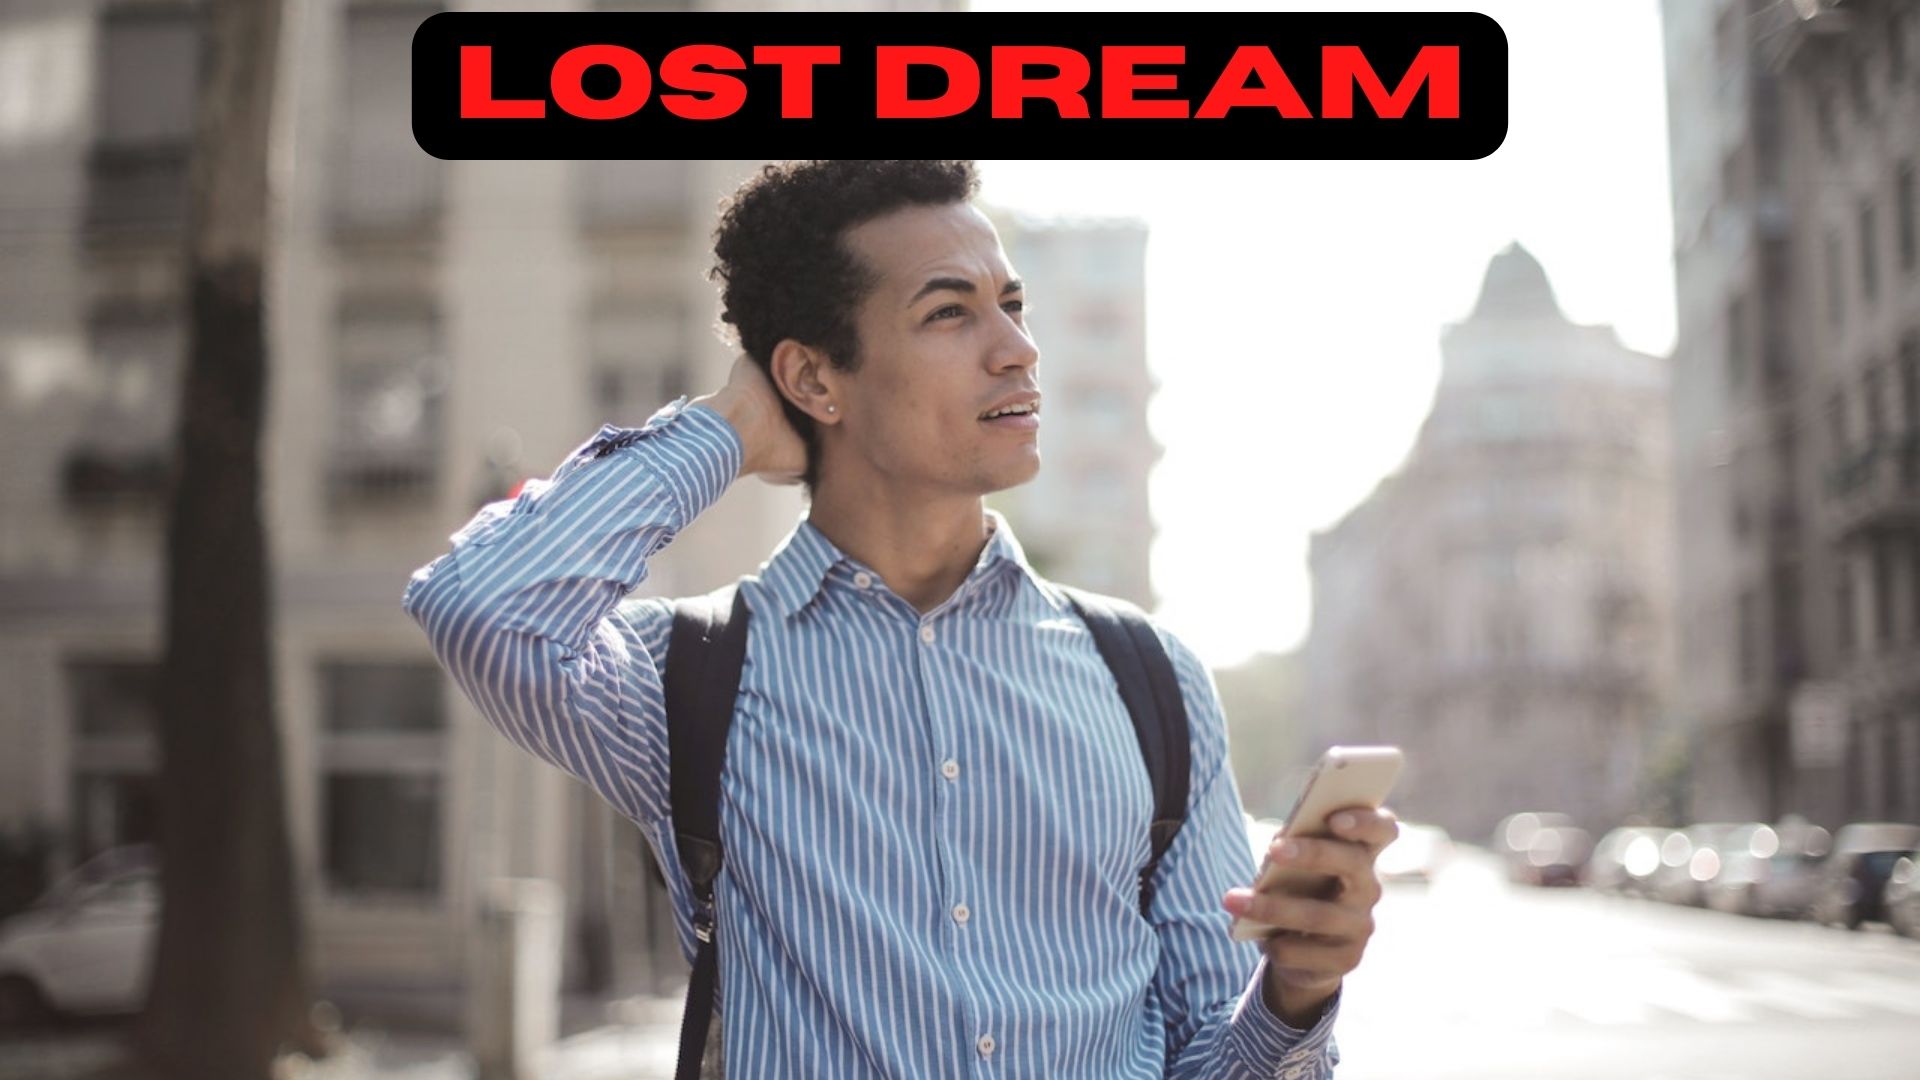 Lost Dream - Mean You Feel Lost And Vulnerable